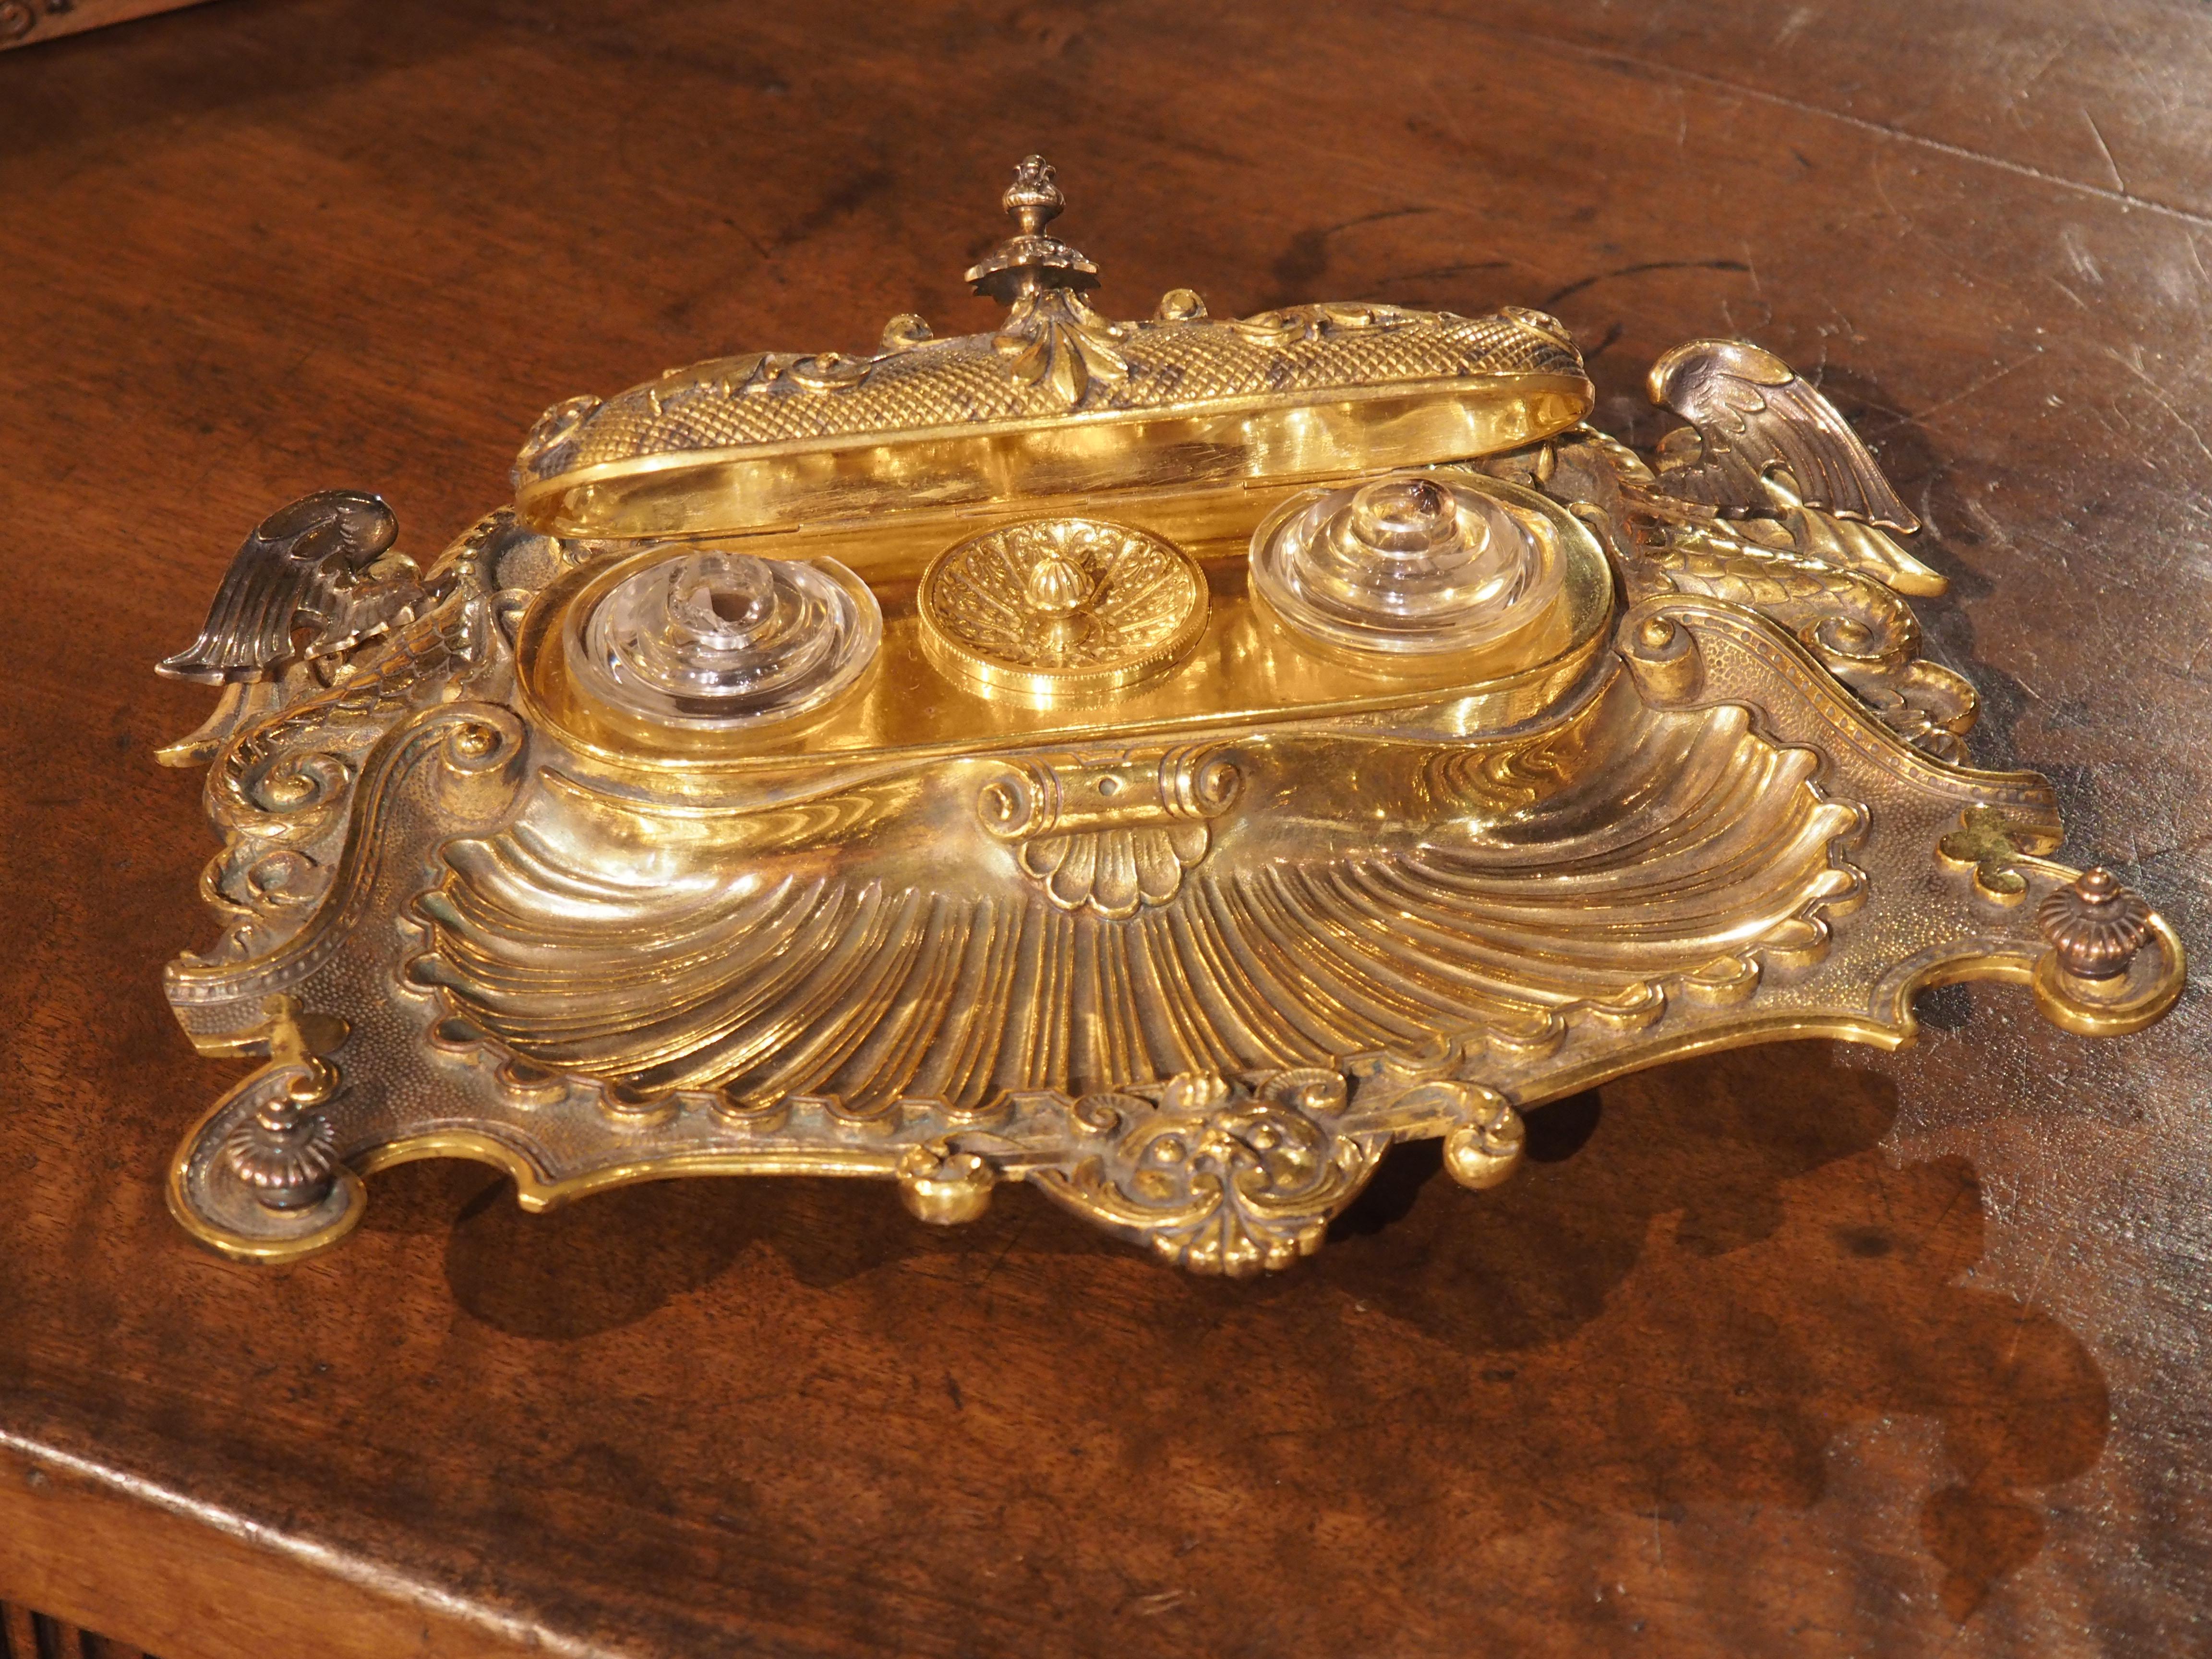 This piece of nineteenth-century French elegance is sure to be the envy of any collector. The Napoleon III gilt bronze inkwell is a prized find, crafted in circa 1840 France with intricate embellishments including a recessed scalloped shell body and